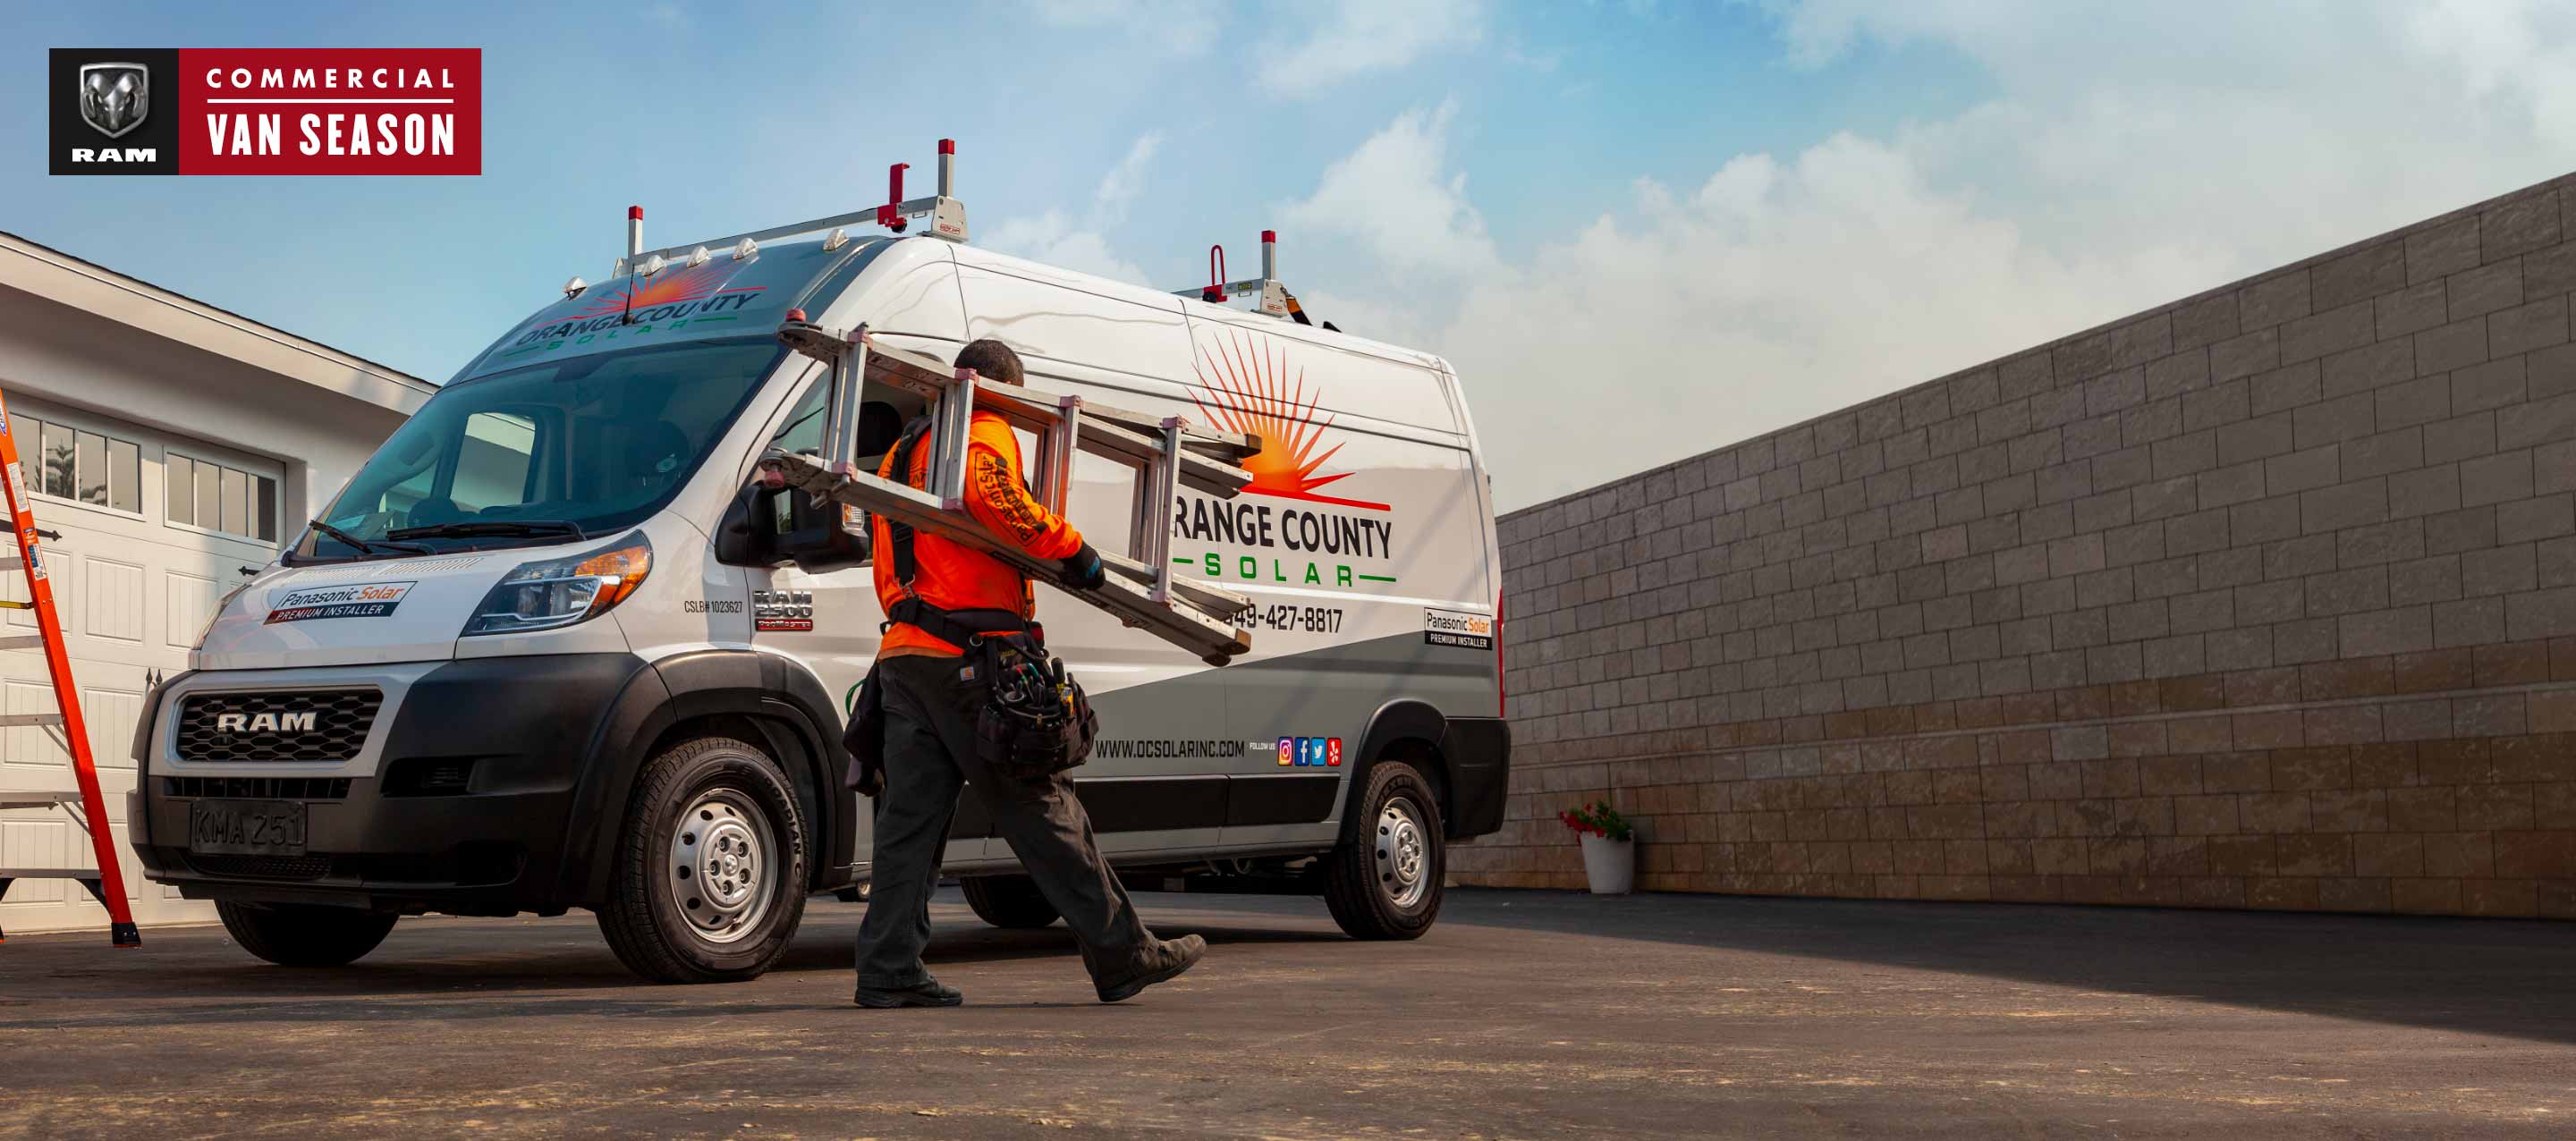 Ram Commercial Van Season. The 2022 Ram ProMaster High Roof with the logo of a solar company on its side.